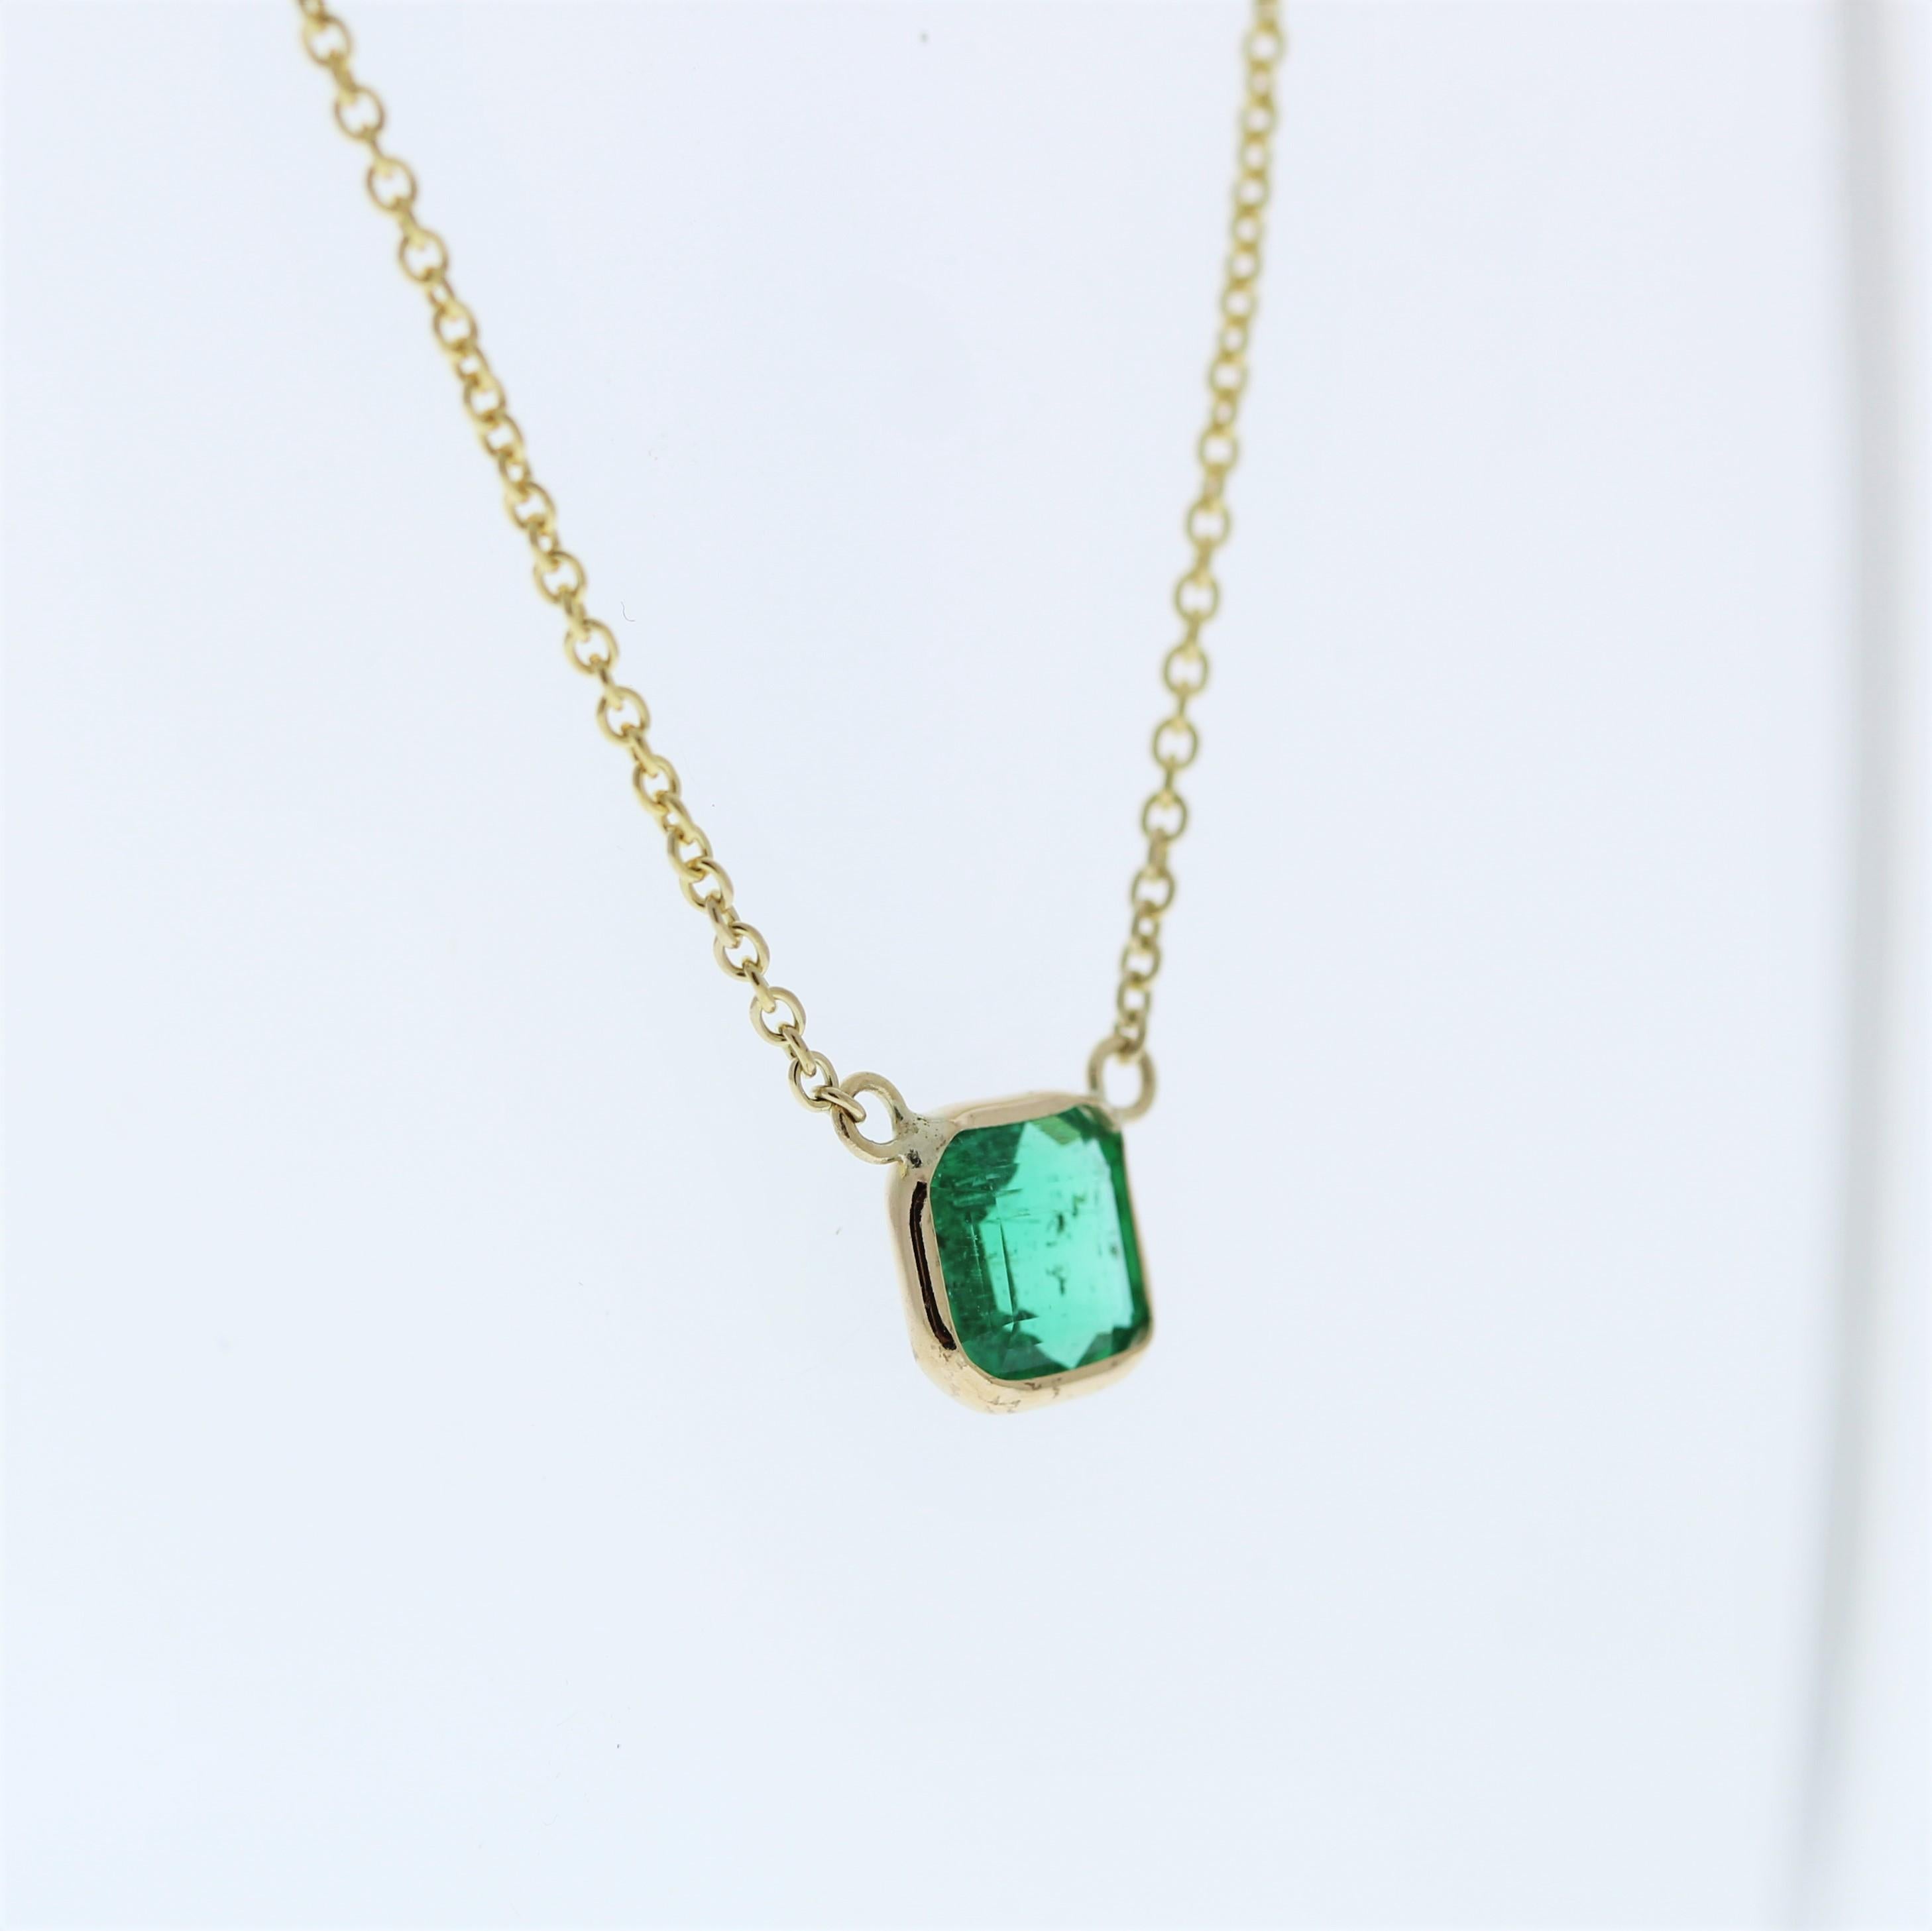 The necklace features a 0.91-carat Asscher-cut green emerald set in a 14 karat yellow gold pendant or setting. The Asscher cut's geometric beauty combined with the emerald's vibrant green color against the yellow gold setting is likely to create an